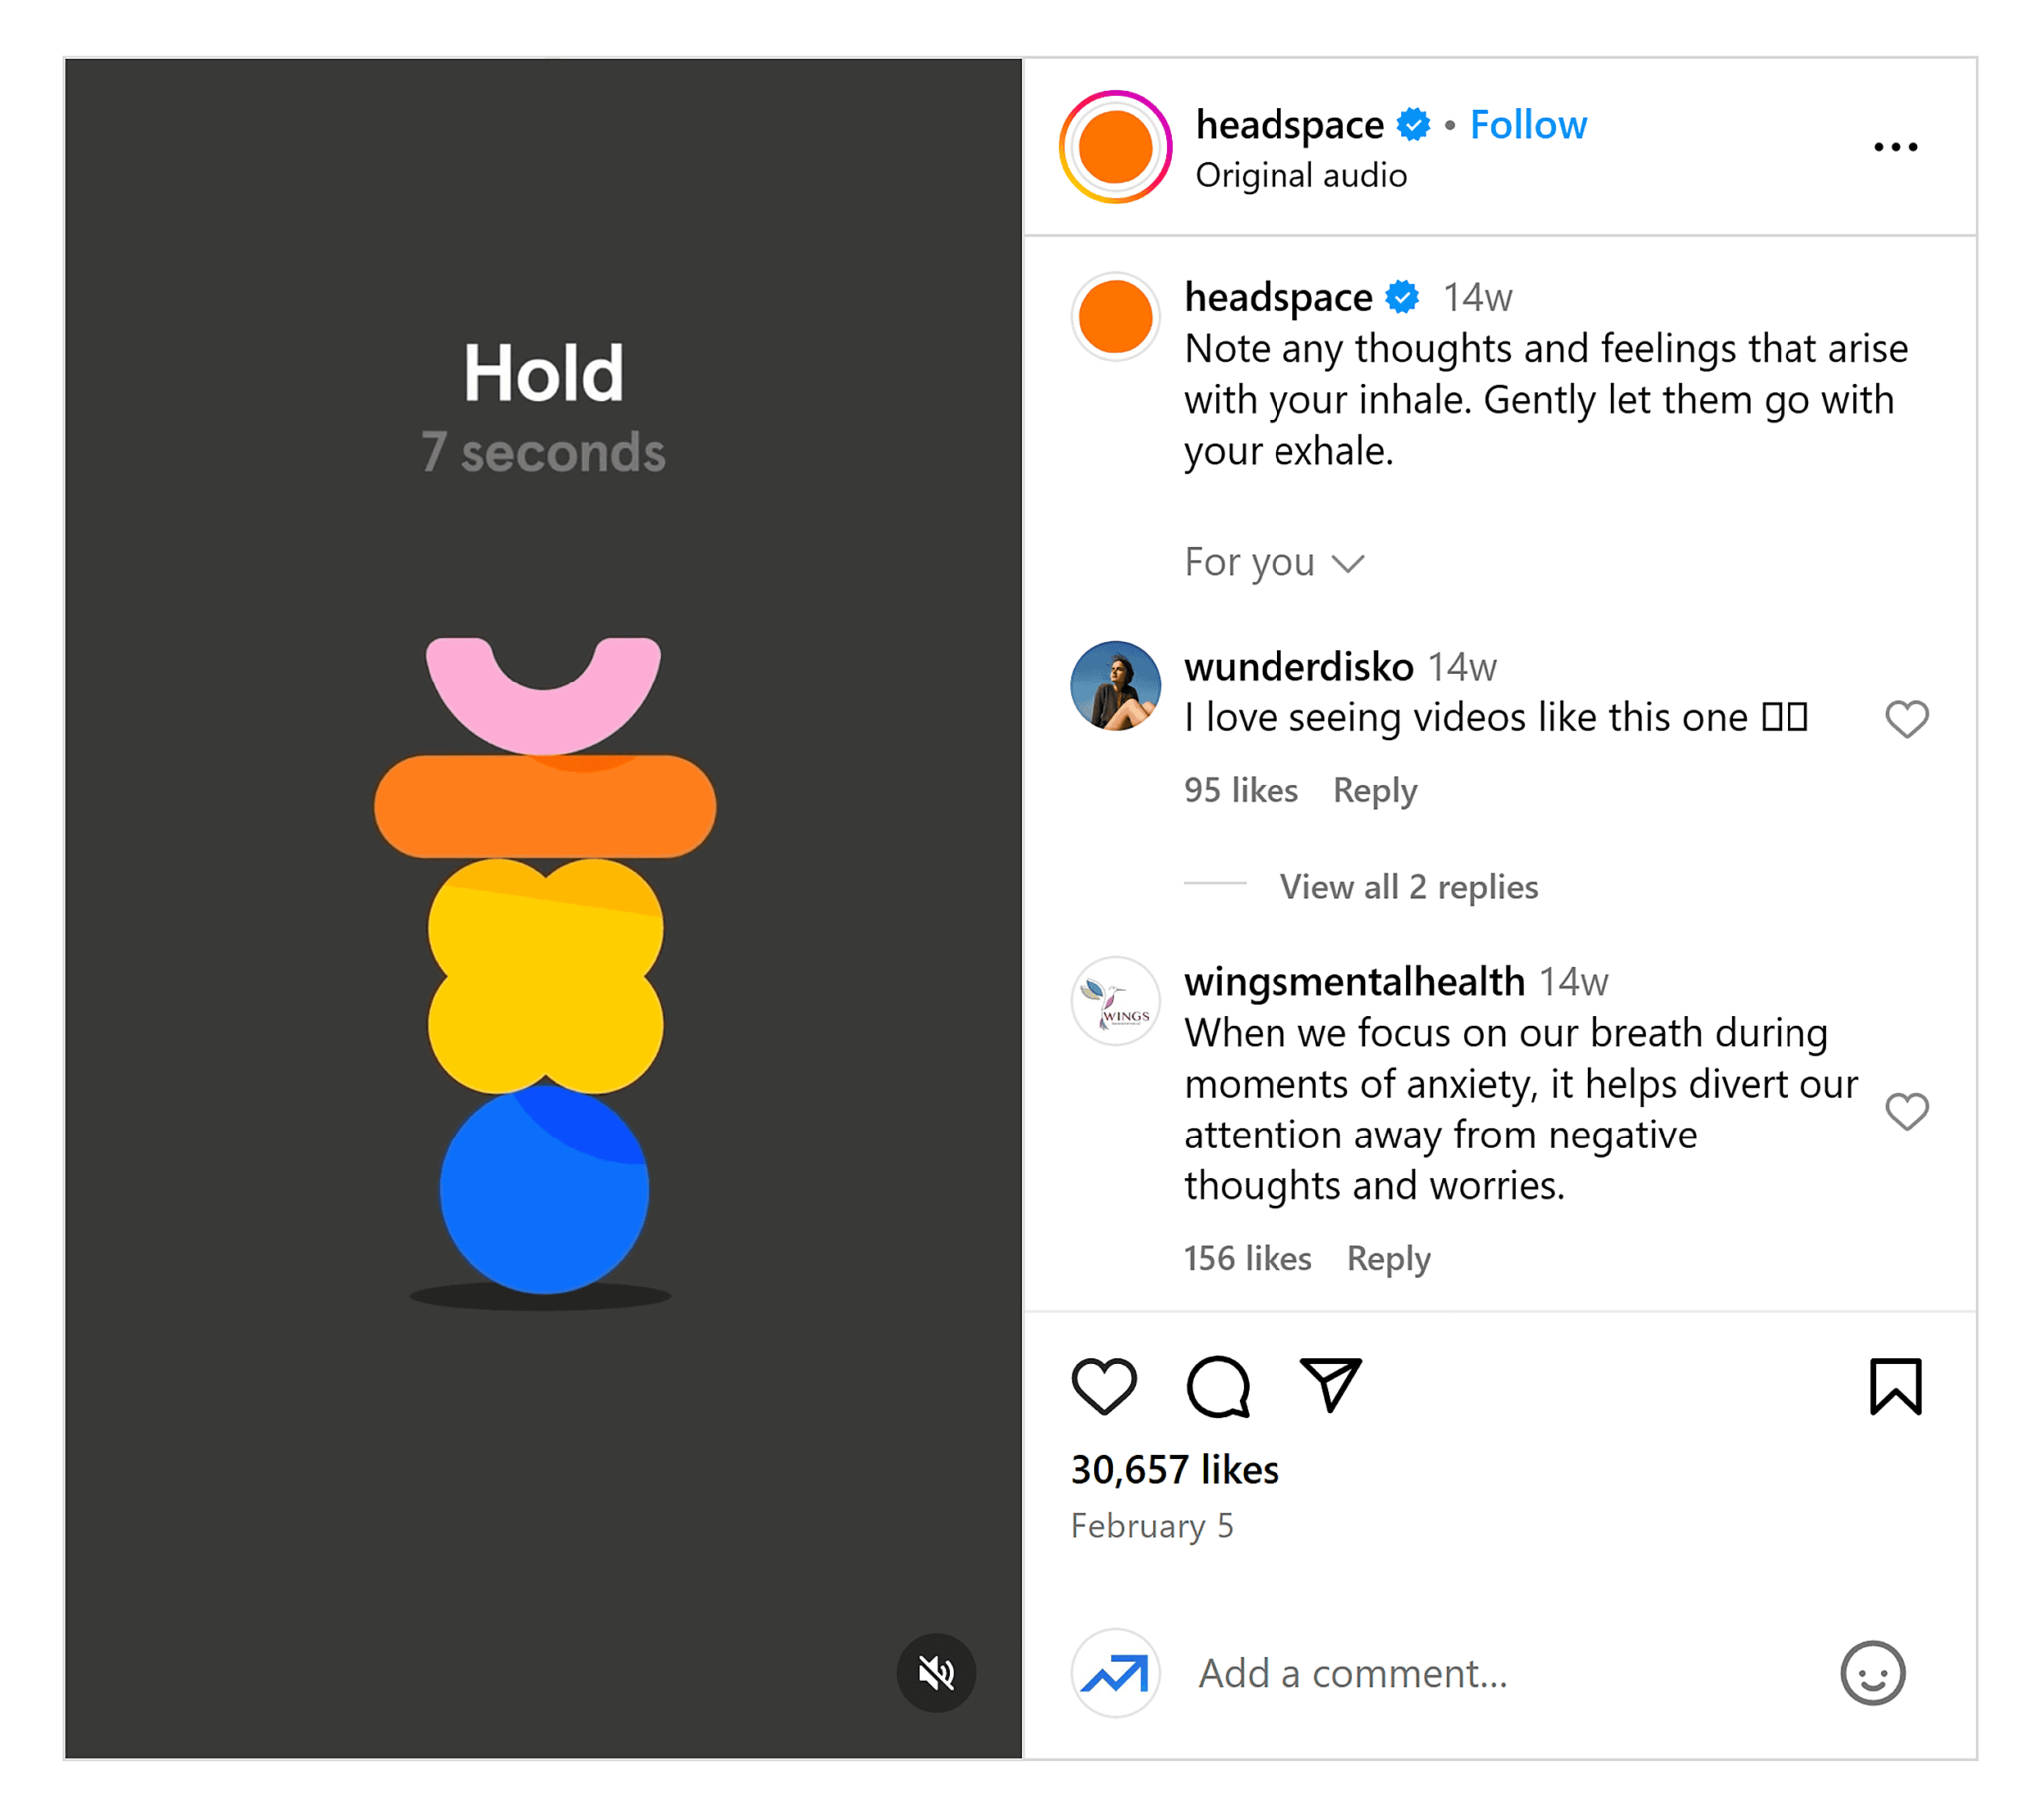 instagram-headspace-video 22 Content Marketing Examples to Inspire You